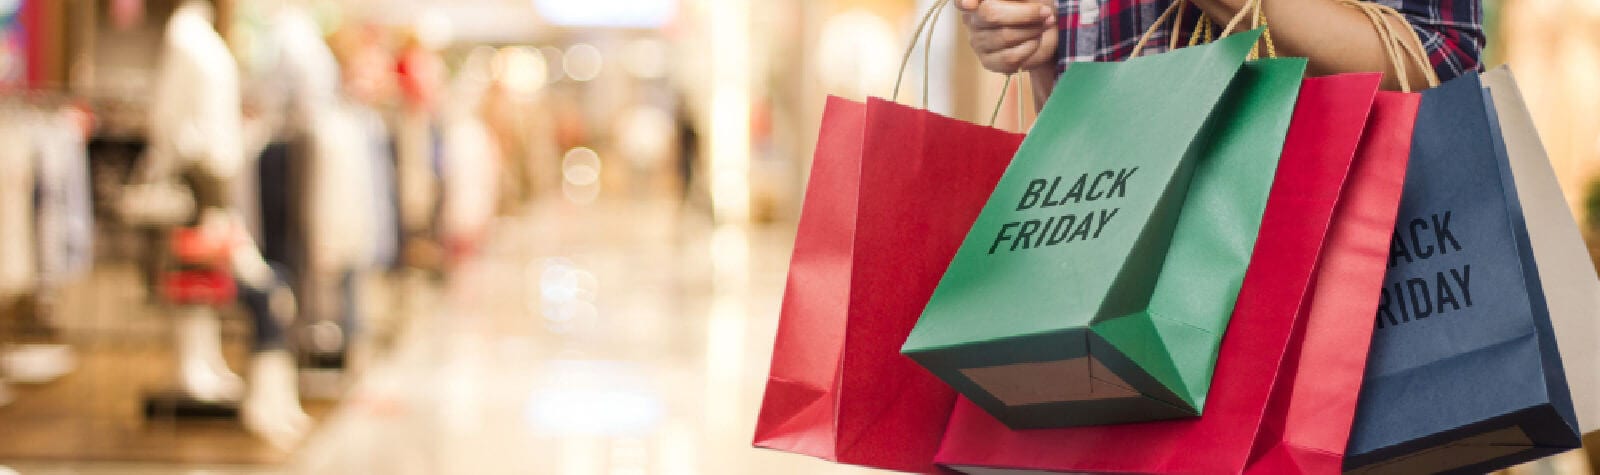 How Will Black Friday Be Different for eCommerce Retailers in 2020?